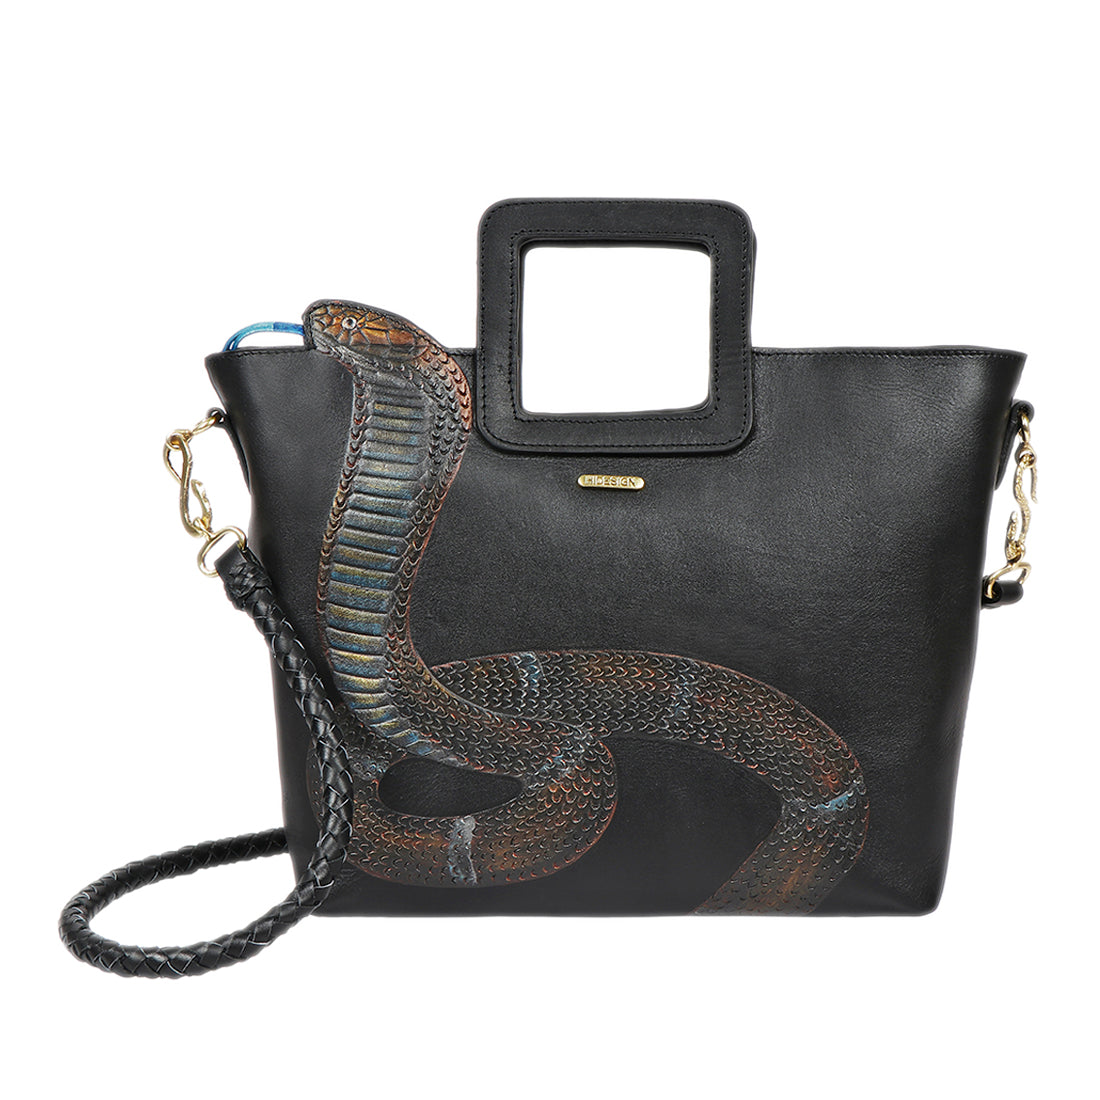 HIDESIGN - Carrying our limited edition King Cobra